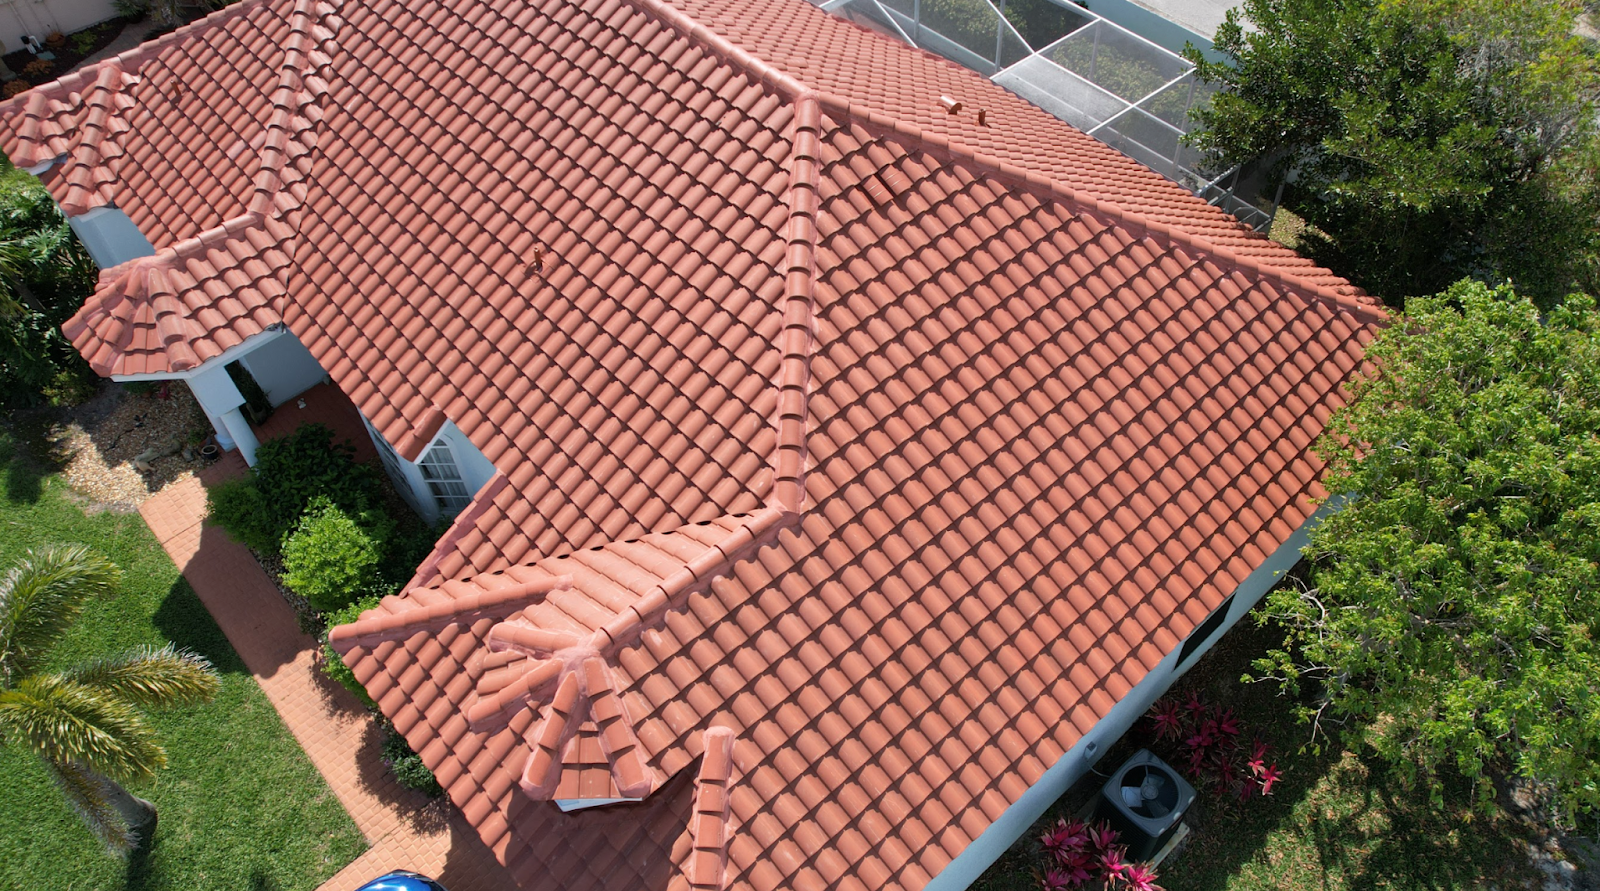 A bird's eye view of red roof tiles, showcasing Wescon Construction's expertise in roofing